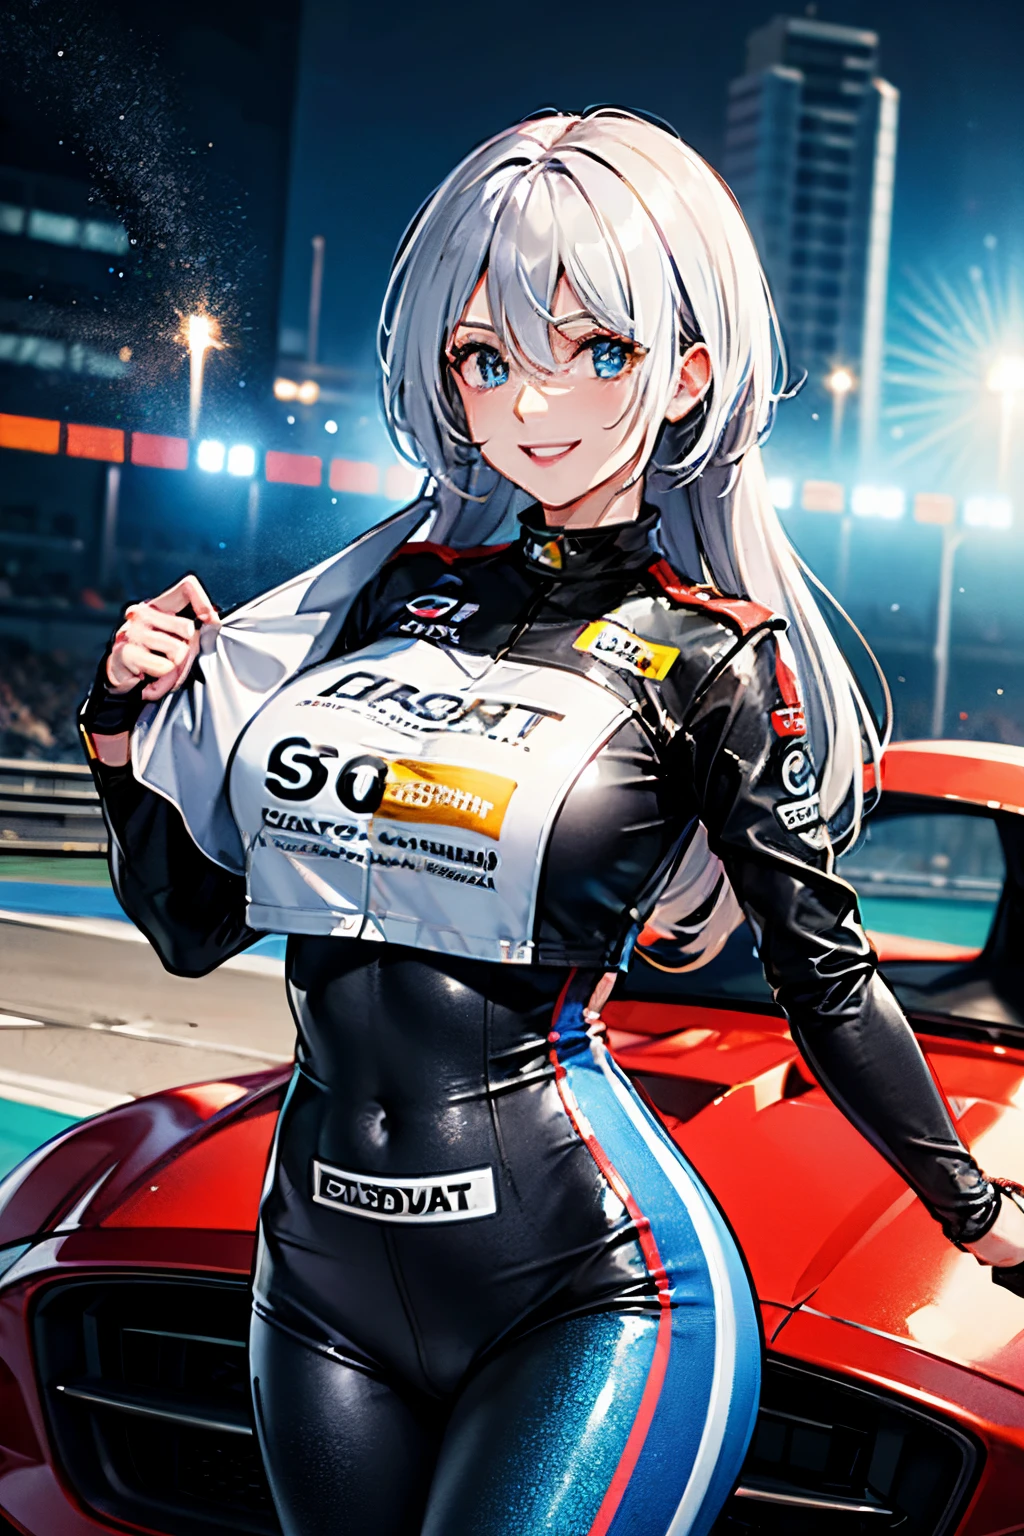 best quality,highres),Tess Darret,Pole Position,holding a race helmet in hands,standing inside of her race car,smiling,anime style,bright colors,dynamic lighting,shiny finish,energetic pose,attention to detail,sparkling eyes,long flowing hair,wearing a racing suit,checkered flag pattern on the car,exciting atmosphere,vivid expressions